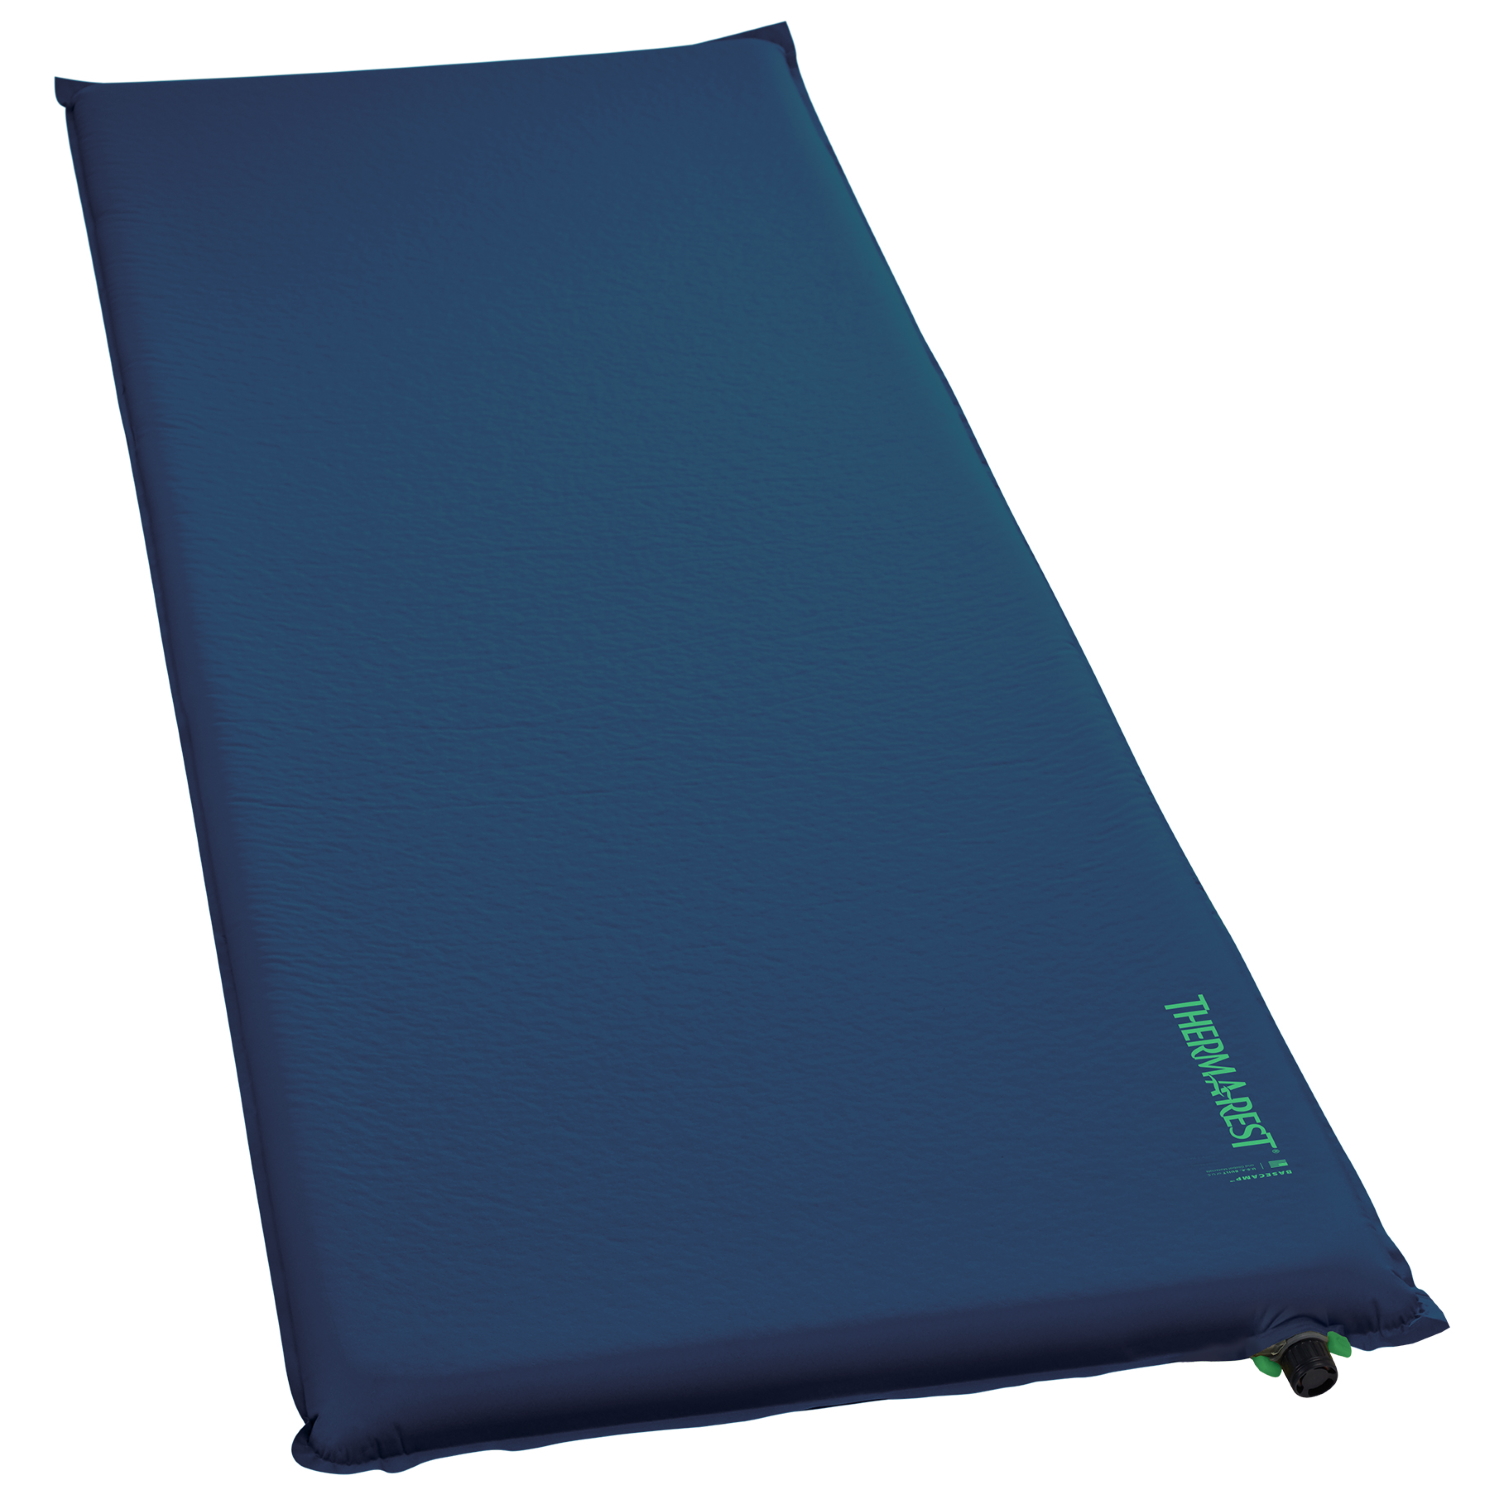 Picture of Therm-a-Rest BaseCamp Mattress Sleeping Pad - Large - Poseidon Blue